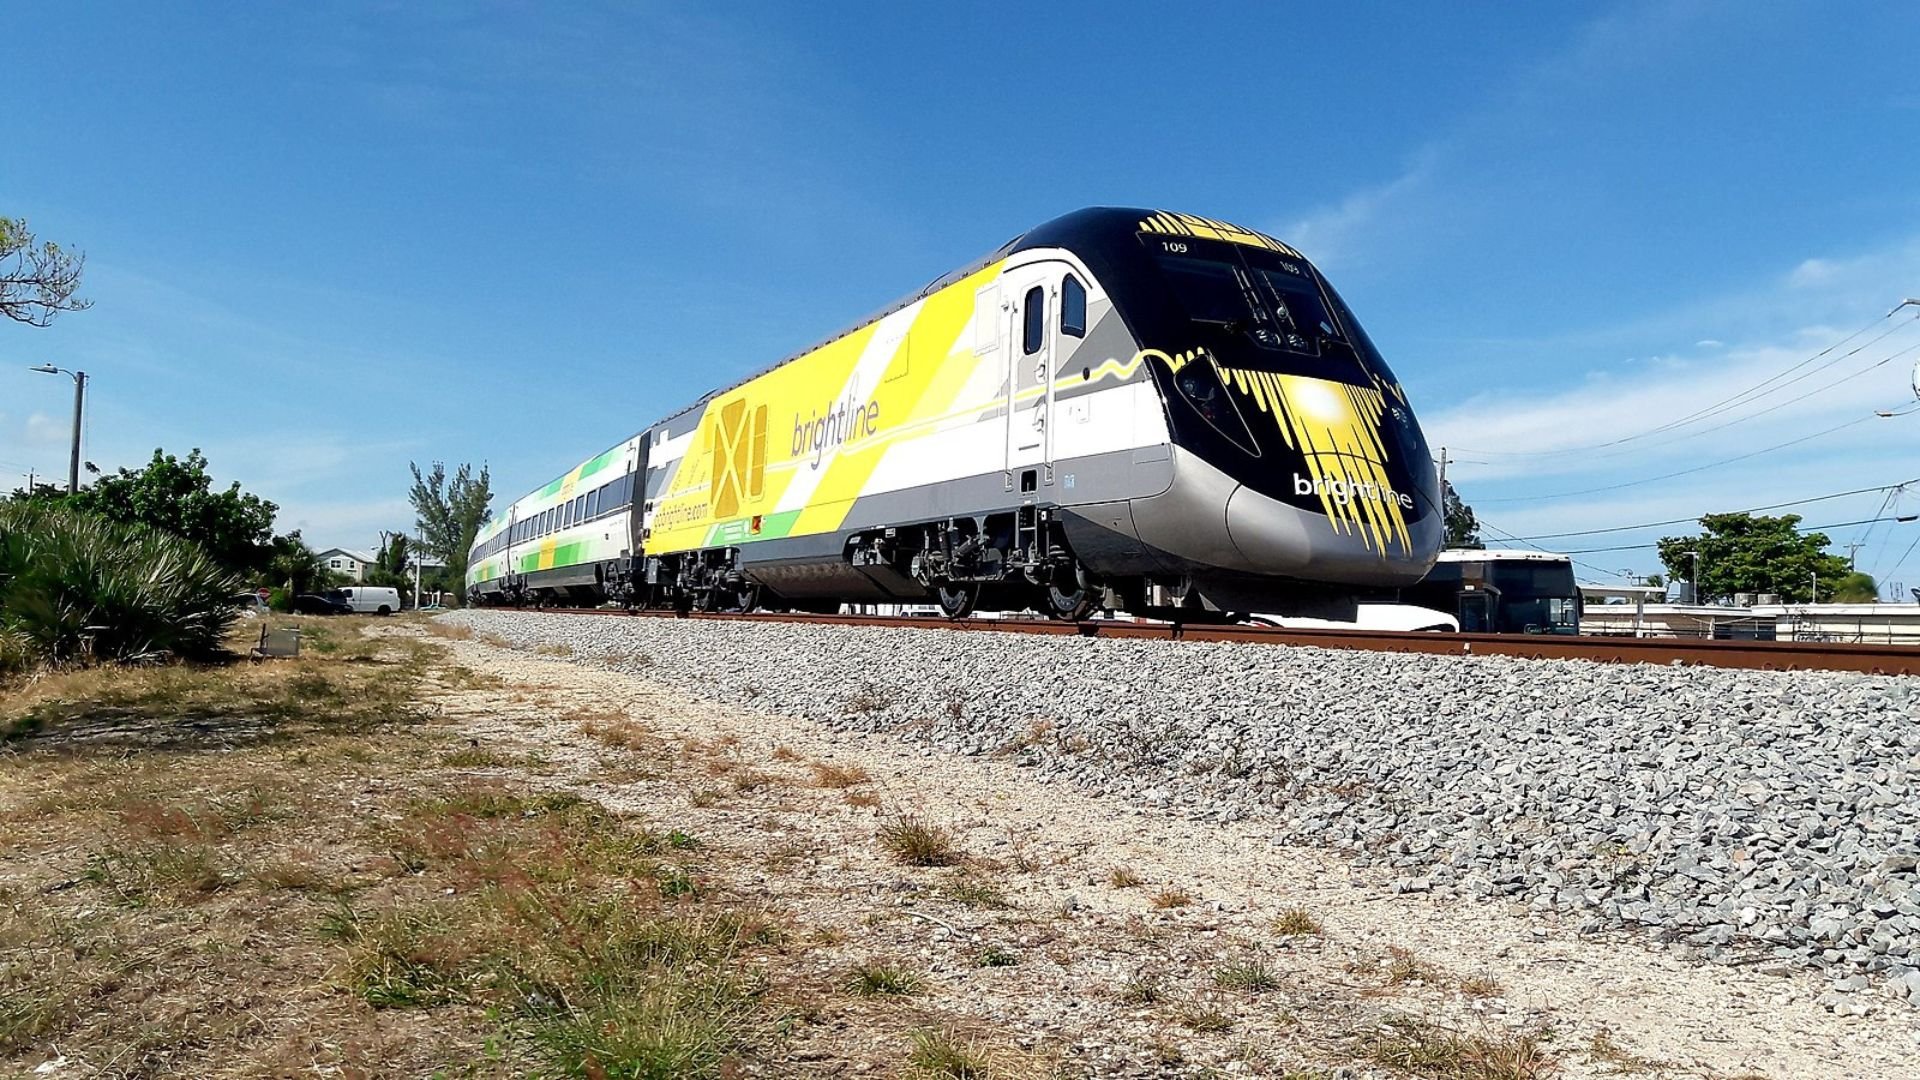 <p>Brightline's significant real estate holdings, including stations and adjacent land, have become key assets for financing its railroad in South Florida.  </p> <p>Regardless of the company’s financially beneficial land development in Florida, the ultimate fate of the 300 acres in Victor Valley, San Bernardino County, and the 110 acres around the Las Vegas station remains uncertain. Real estate development is integral to the Brightline West project, suggesting that the strategic use of land could play a crucial role in its success.    </p>